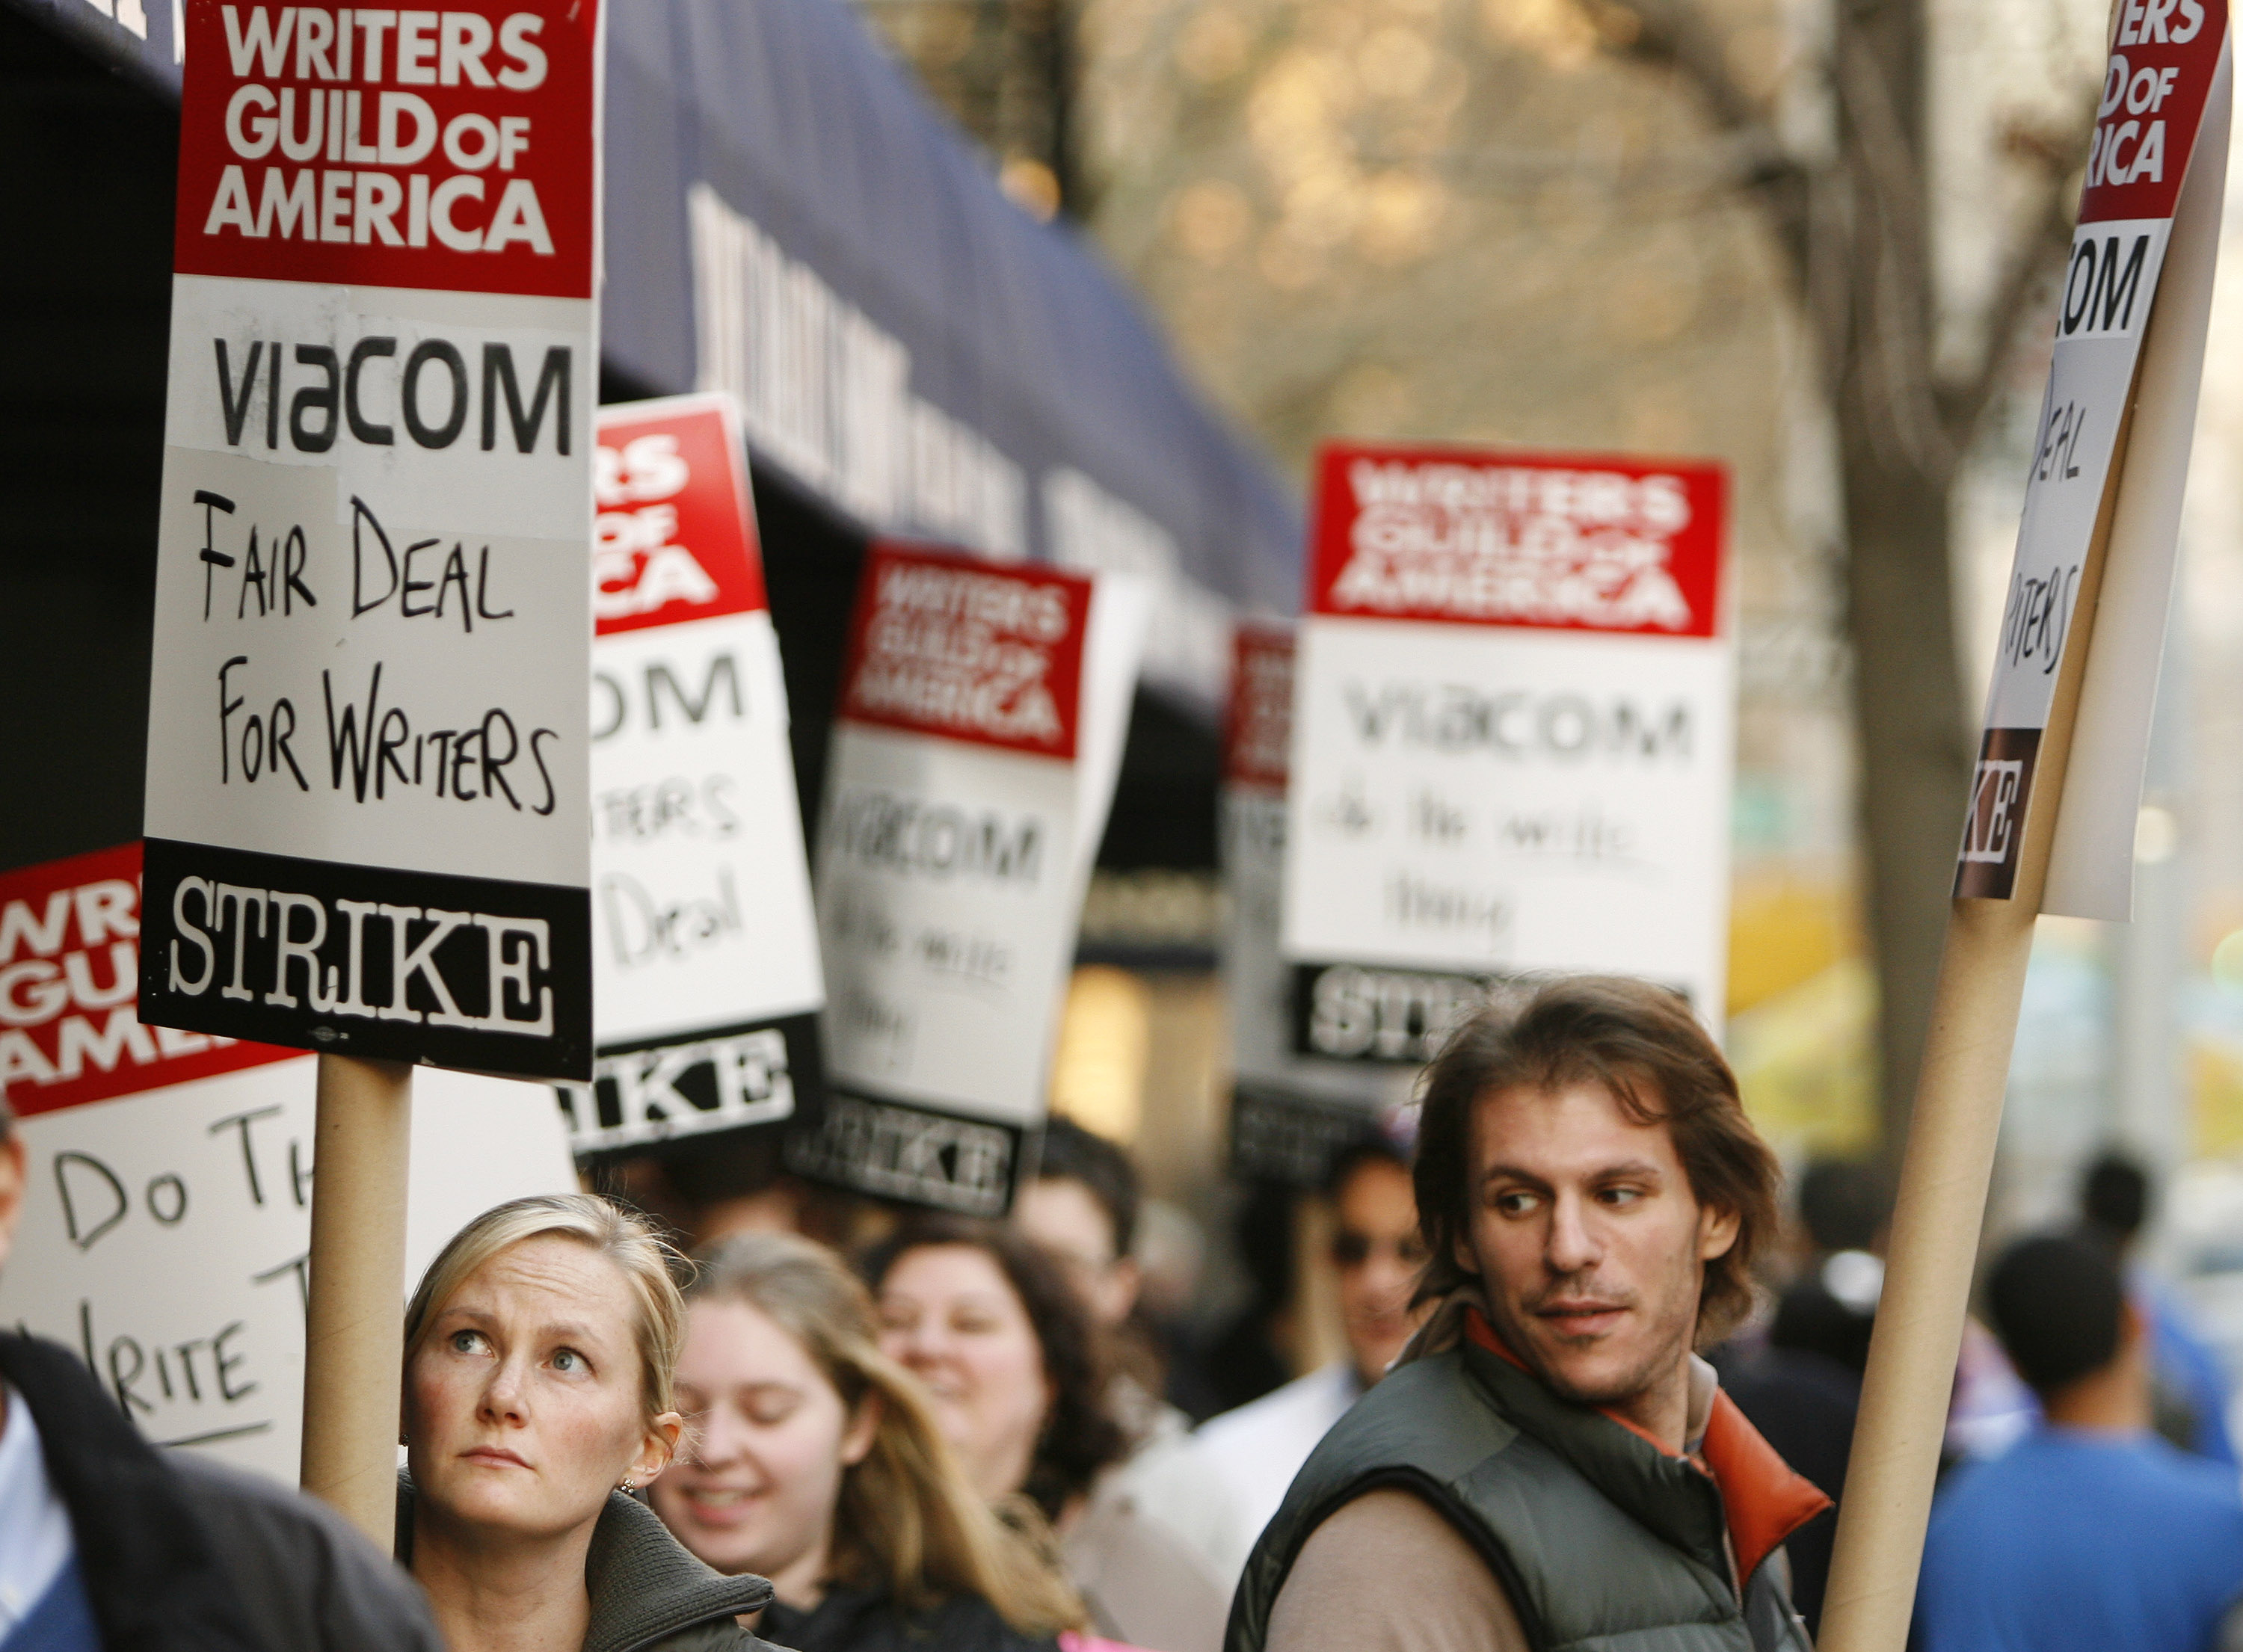 Picketers from the Writers Guild Of America demonstrate in front of the studio where "The Daily Show" is filmed in New York, January 7, 2008. REUTERS/Lucas Jackson